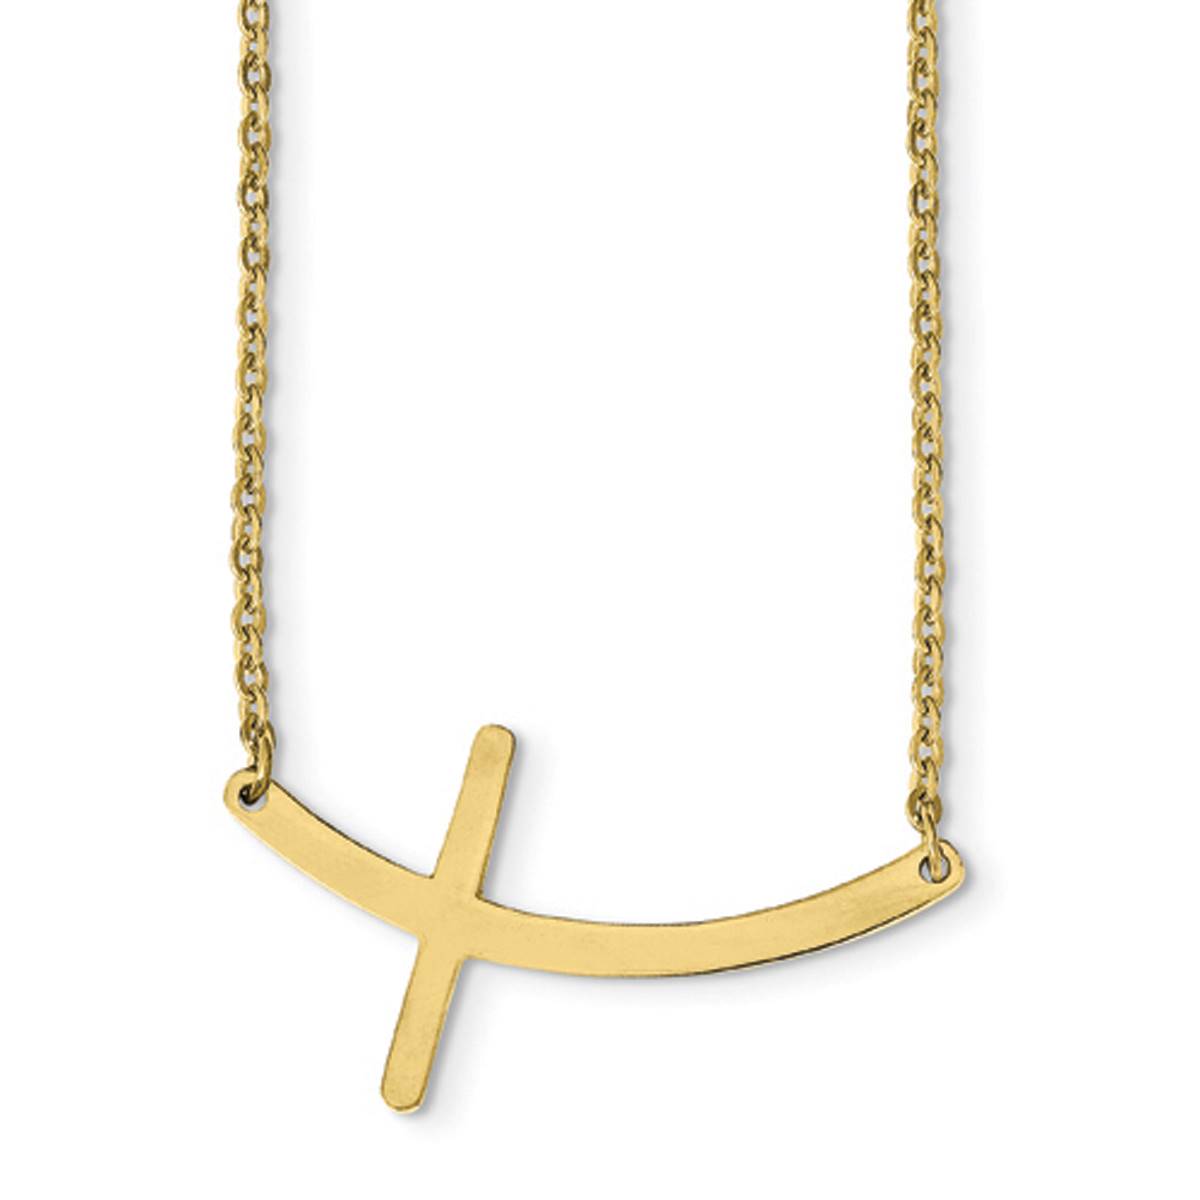 Gold Classics(tm) Gold Plated Sideways Cross Necklace